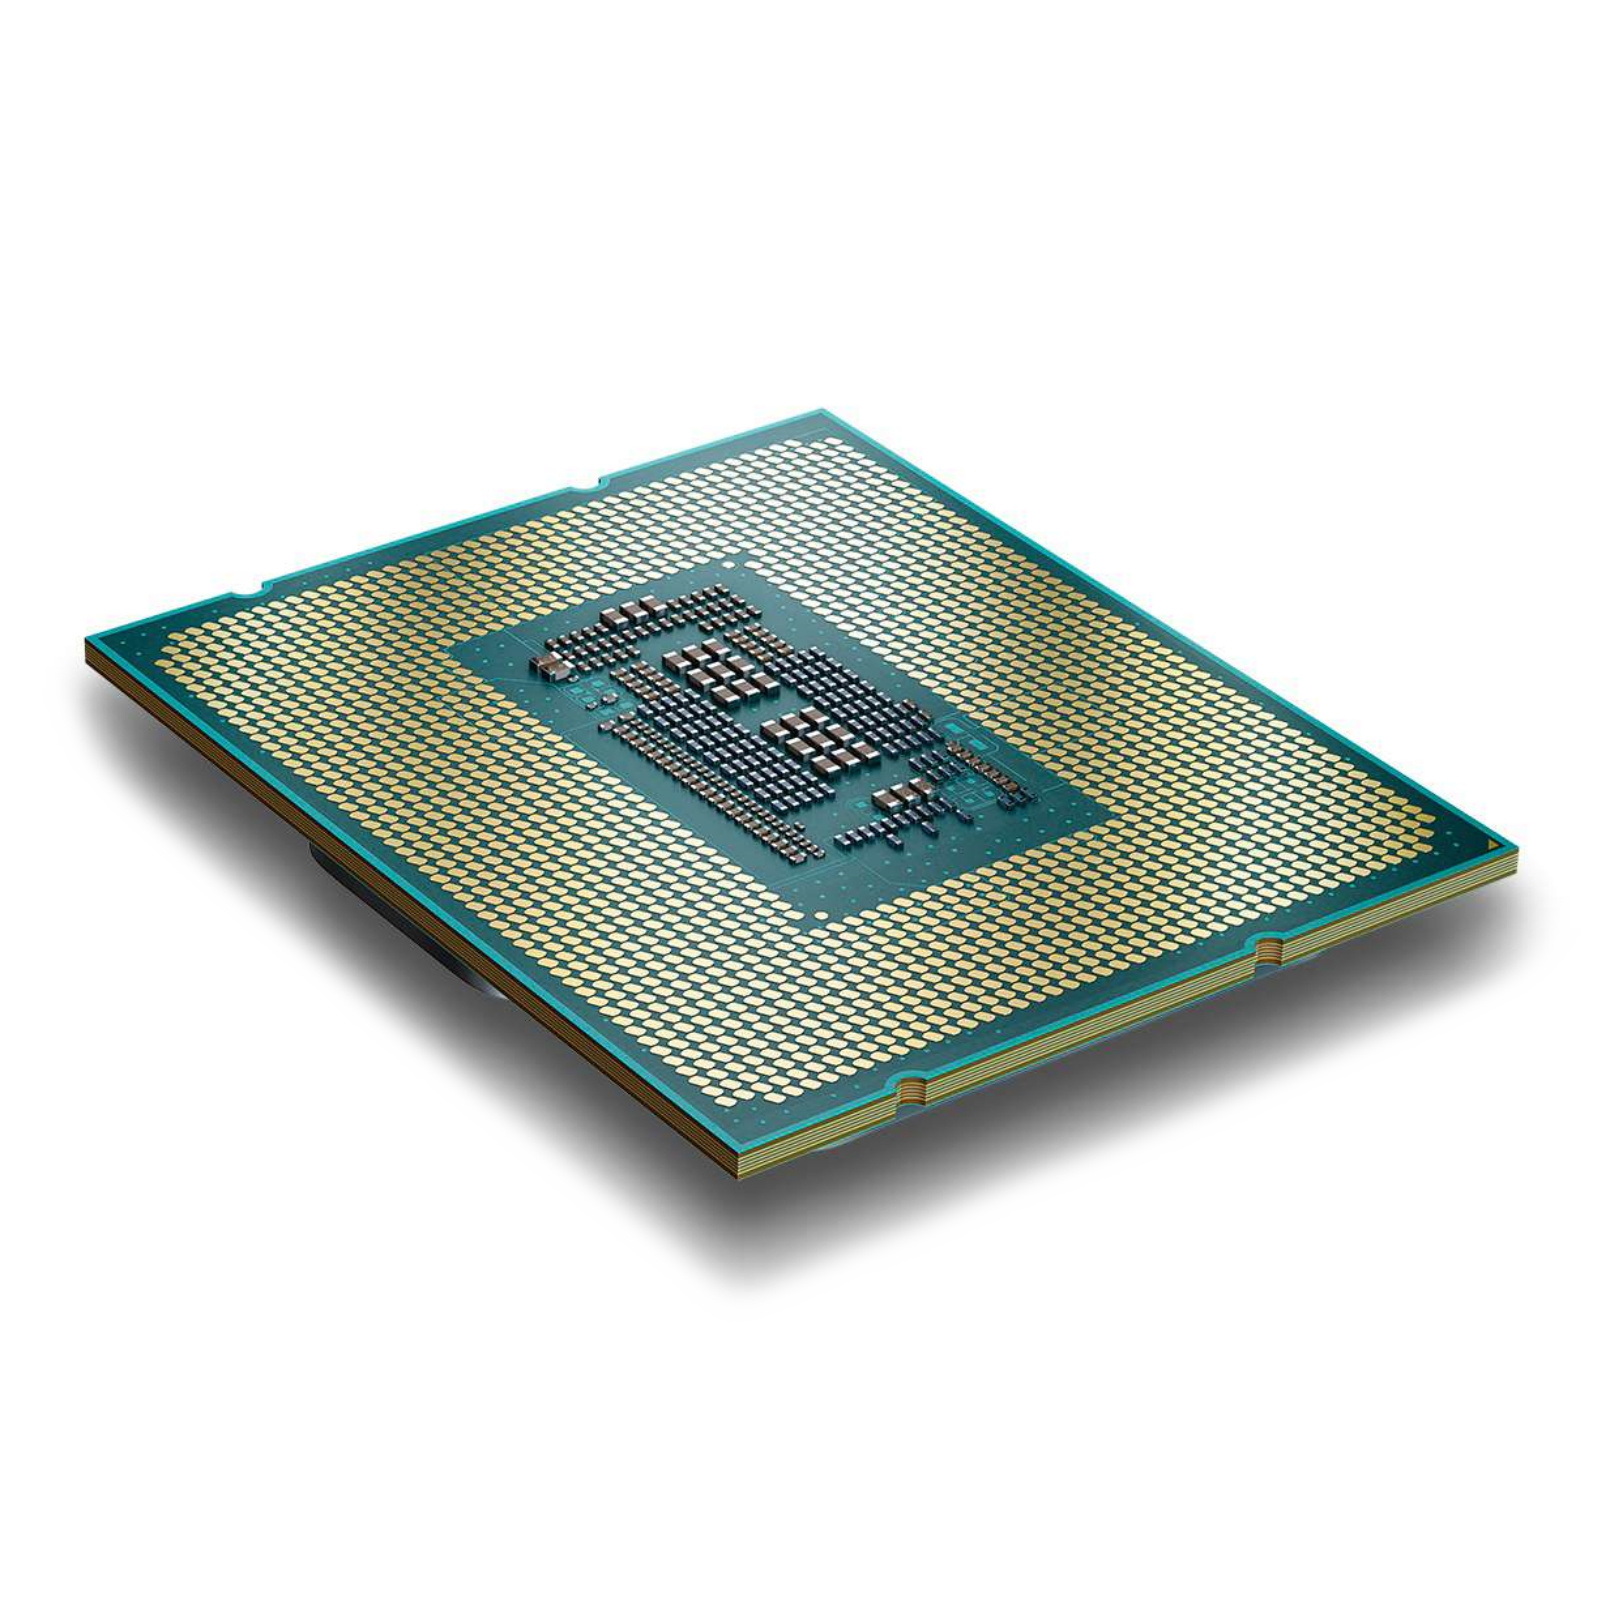 Buy the Intel Core i7 13700K CPU 16 Cores / 24 Threads - Max Turbo